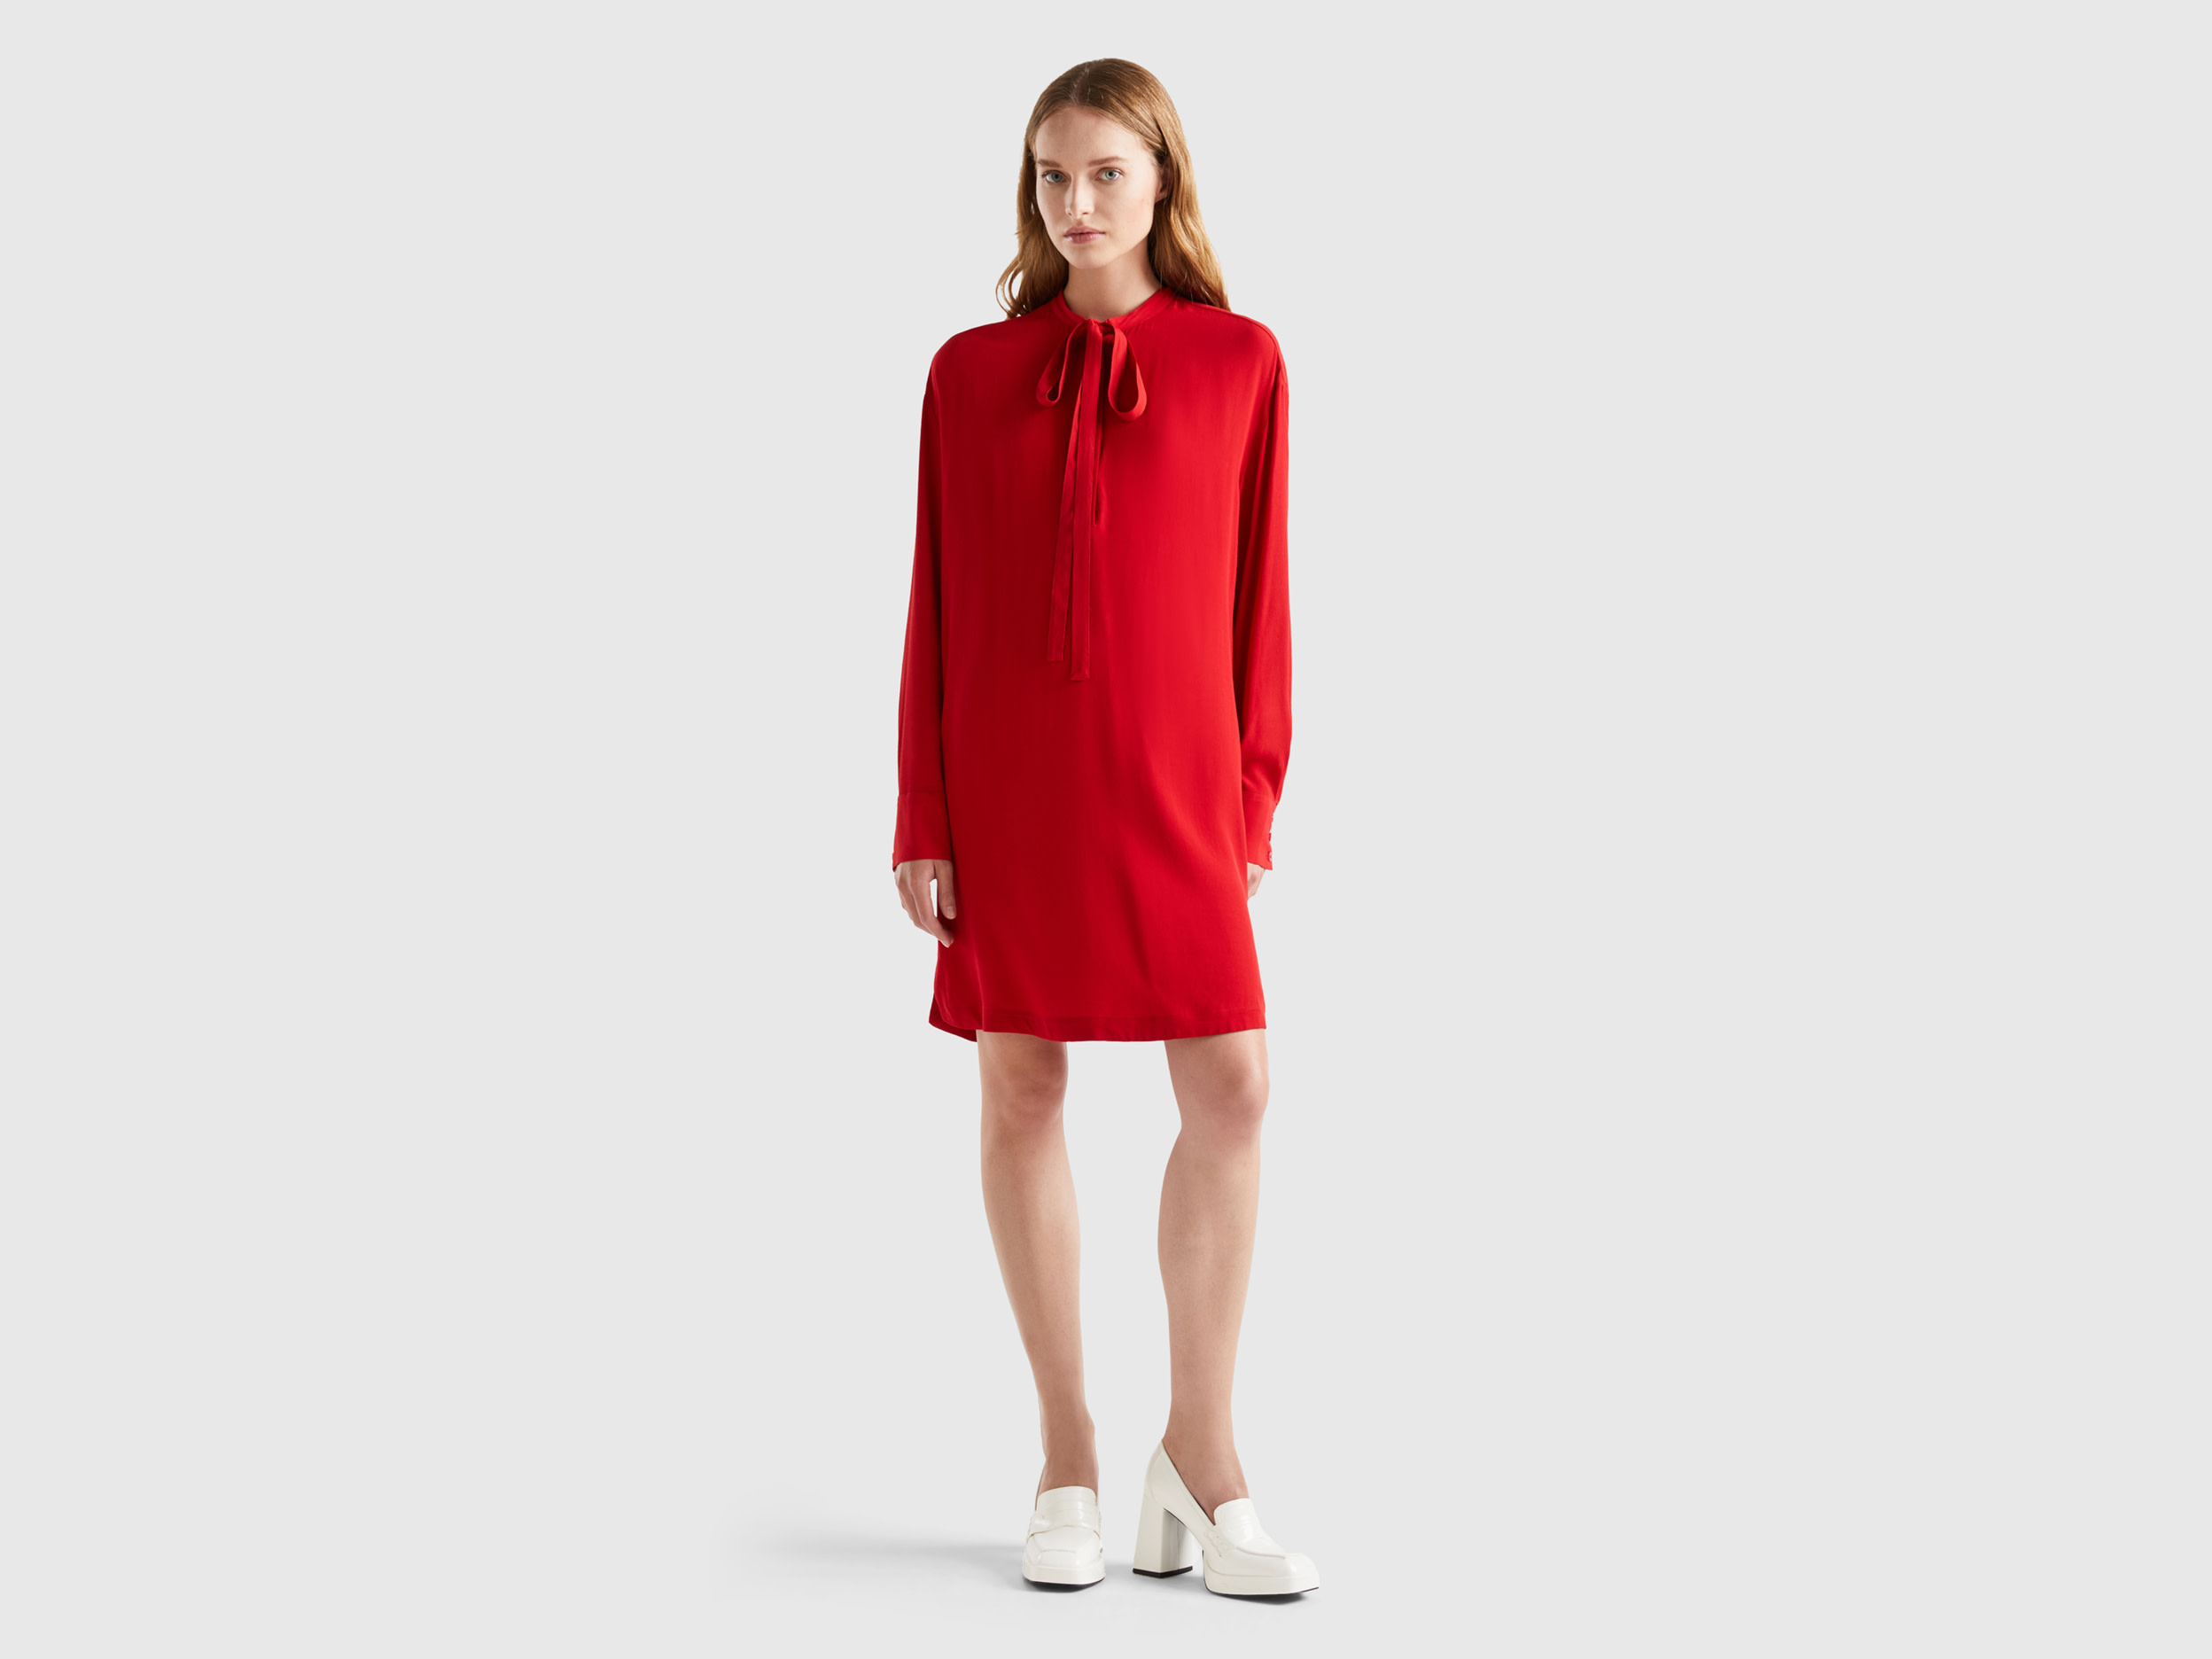 Benetton, Short Dress With Laces, size L, Red, Women